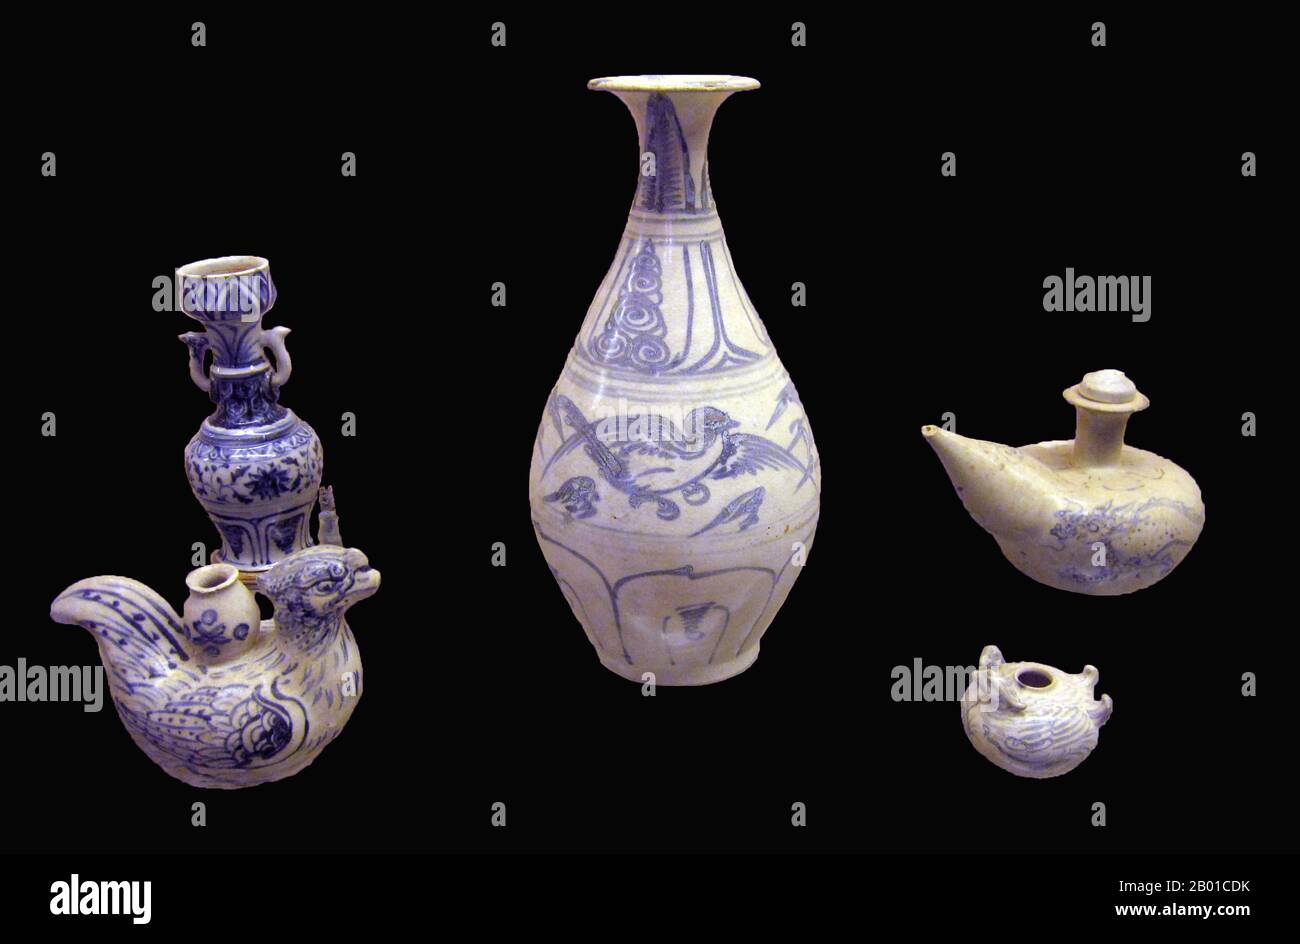 Vietnam: A lampstand together with a vase and ewers in phoenix shape. Blue and white ceramic, Early Lê Dynasty, 15th century. Chu Đậu kiln, Hải Dương province. National Museum of Vietnamese History, Hanoi. Photo by Gryffindor - Sisyphos23 (CC BY-SA 3.0 License). Stock Photo